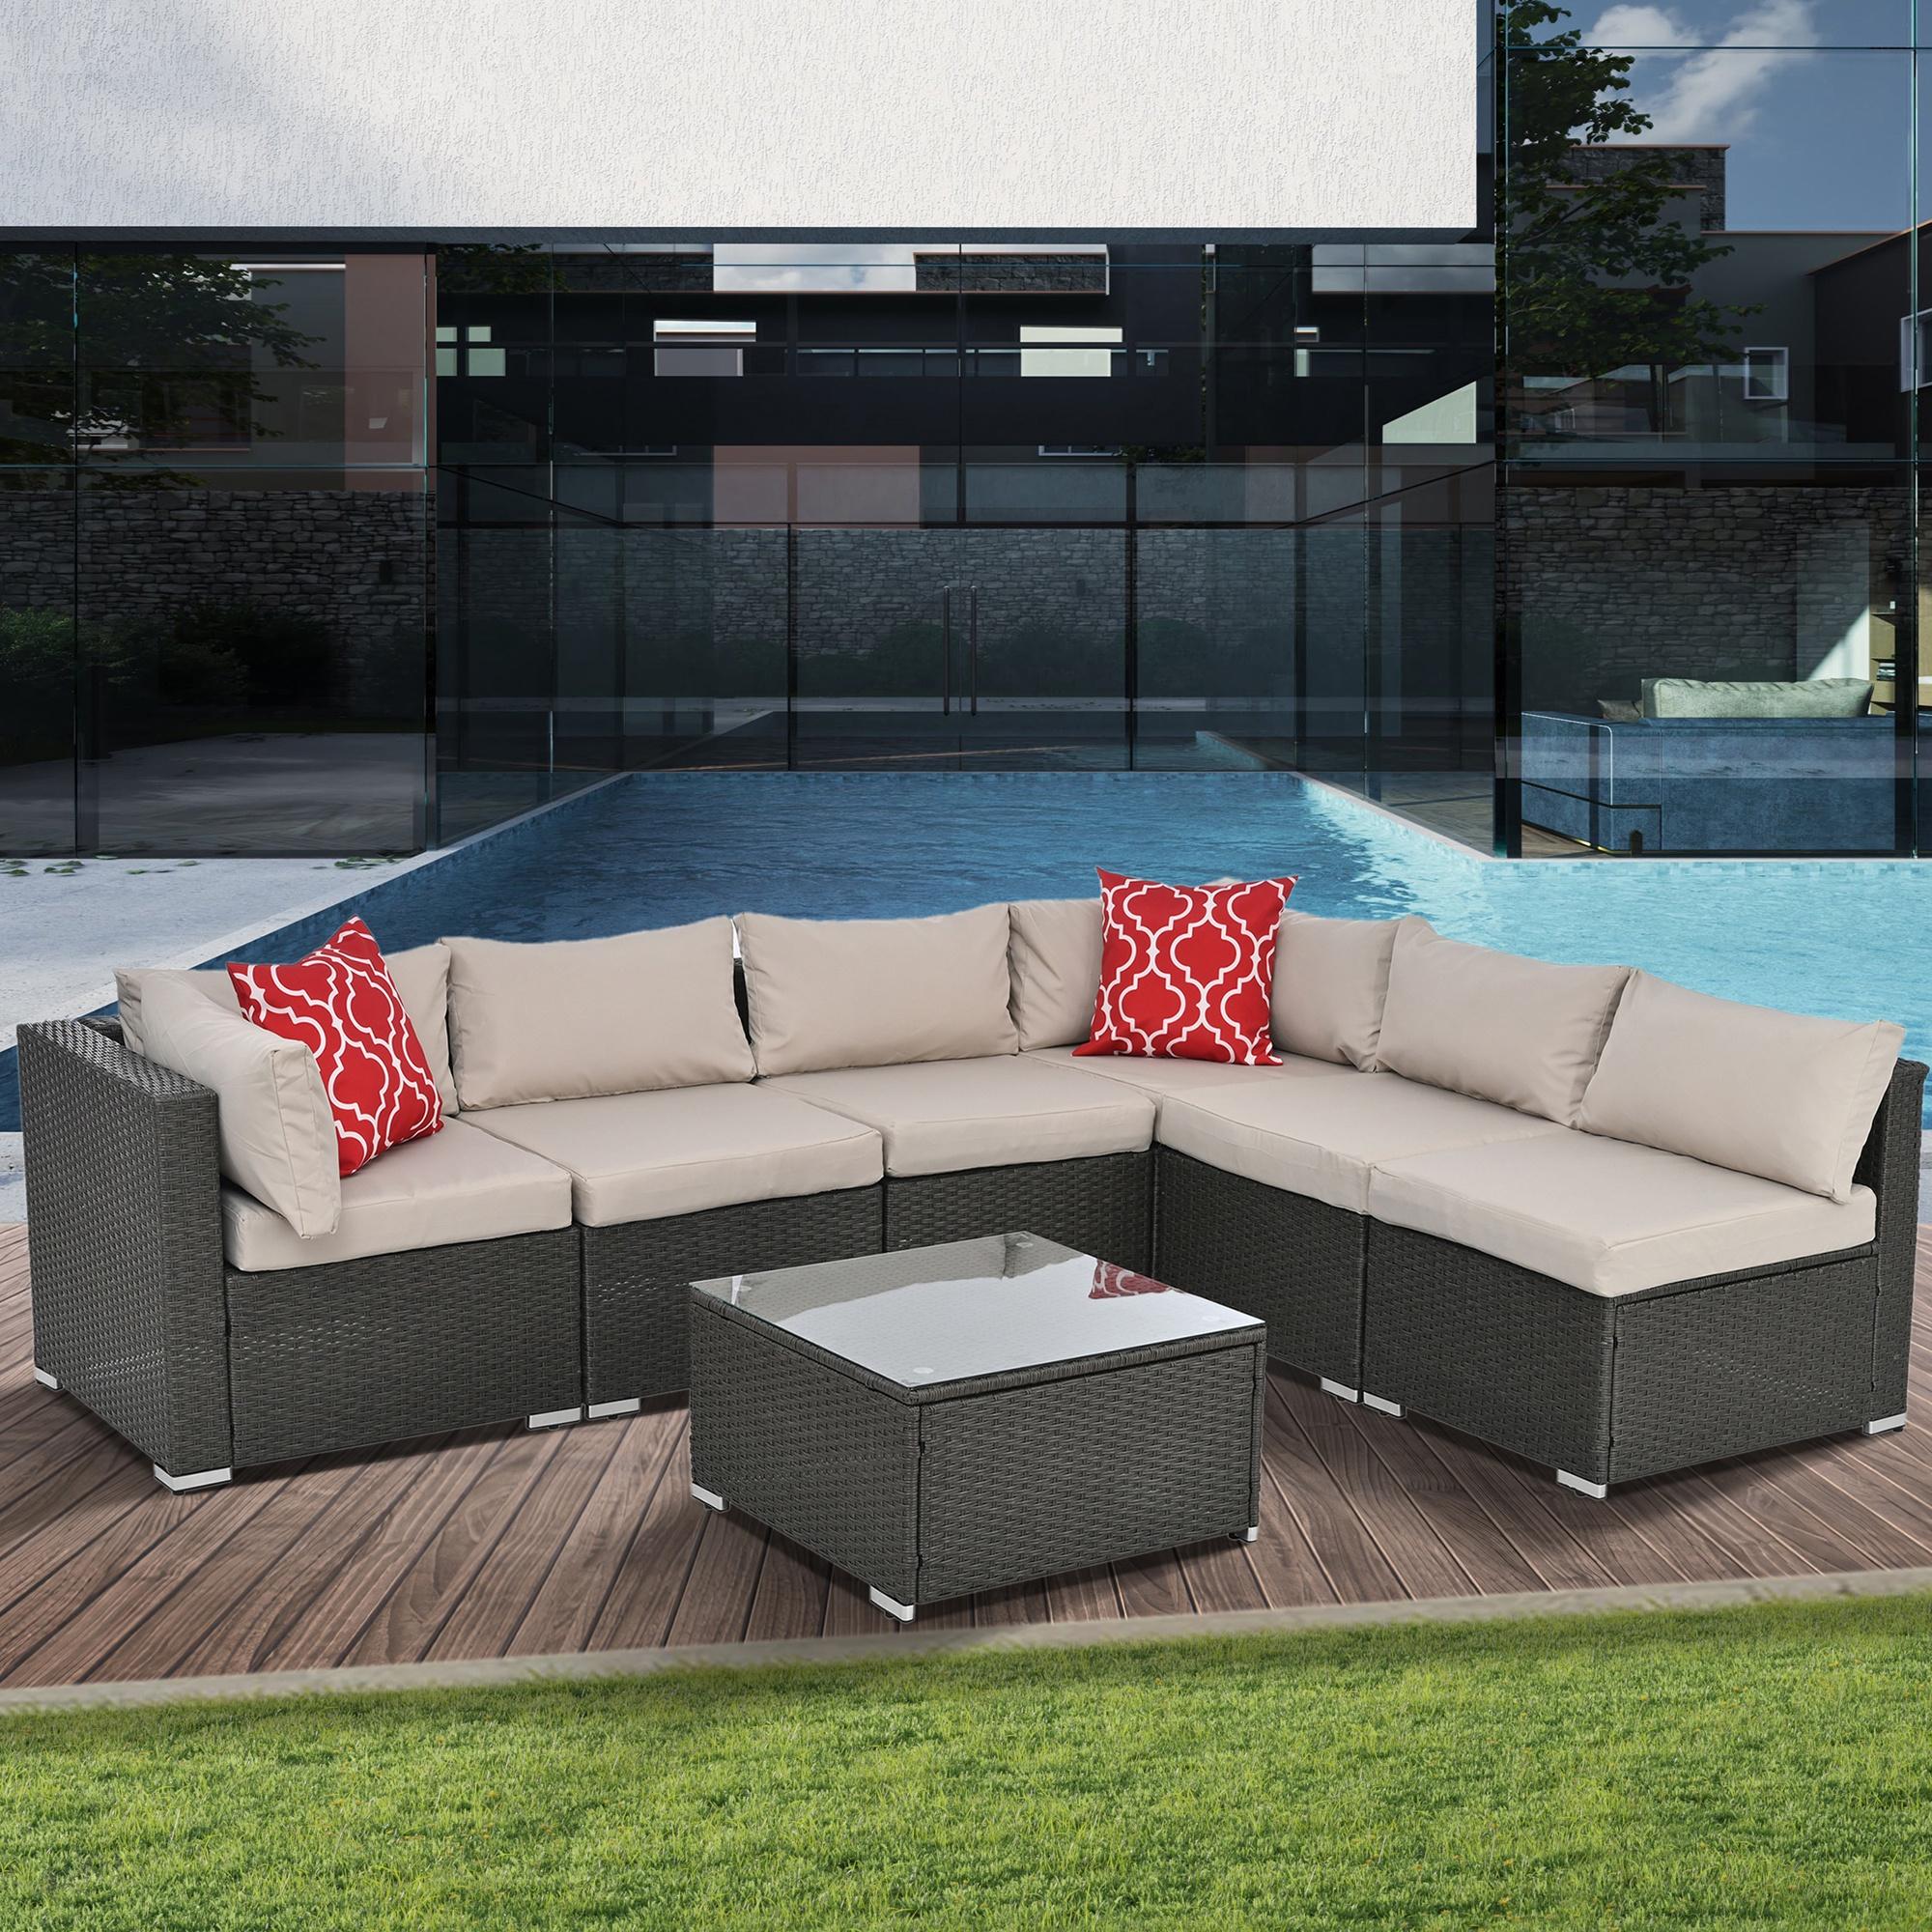 Wicker Patio Sofa Sets, 7 Pieces Outdoor Seating Sets, Lounge Sofa and Tempered Glass Coffee Table, Deck Front Garden Furniture Set, Gray Rattan + Beige Cushion - image 3 of 10